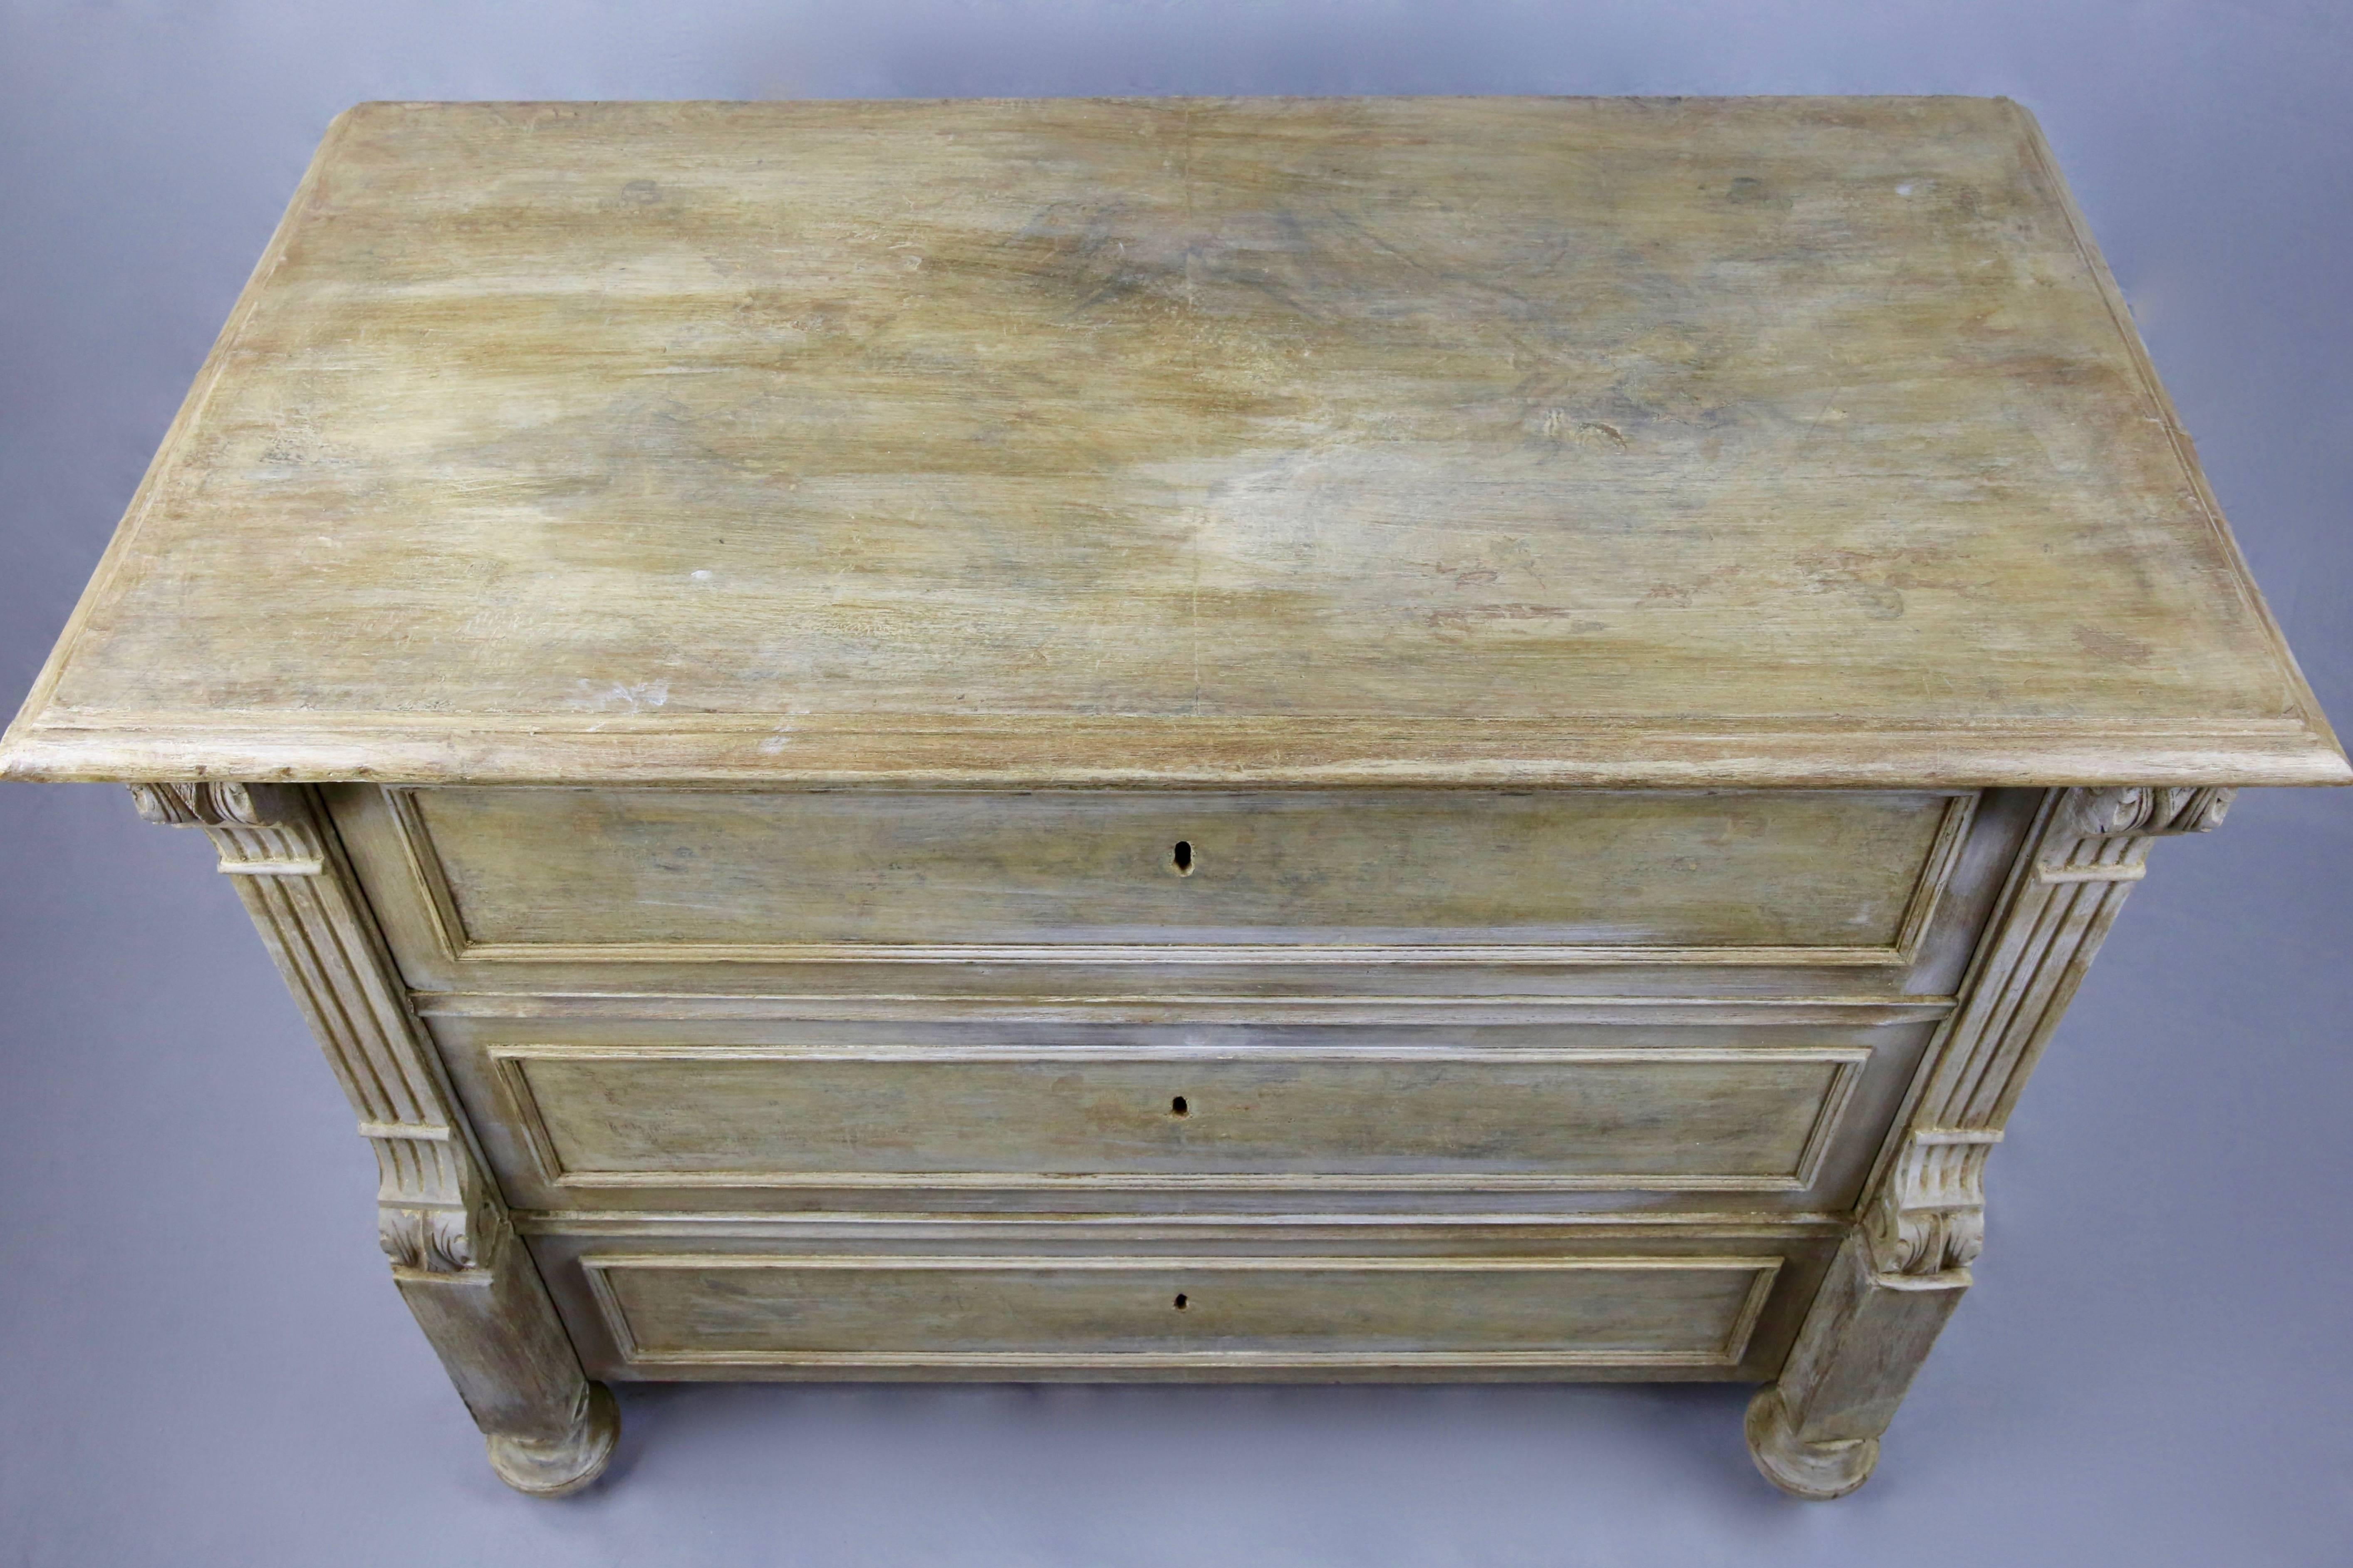 19th Century Viennese Baroque Revival Bleached Walnut Small Chest of Drawers In Excellent Condition For Sale In Henley-on-Thames, Oxfordshire